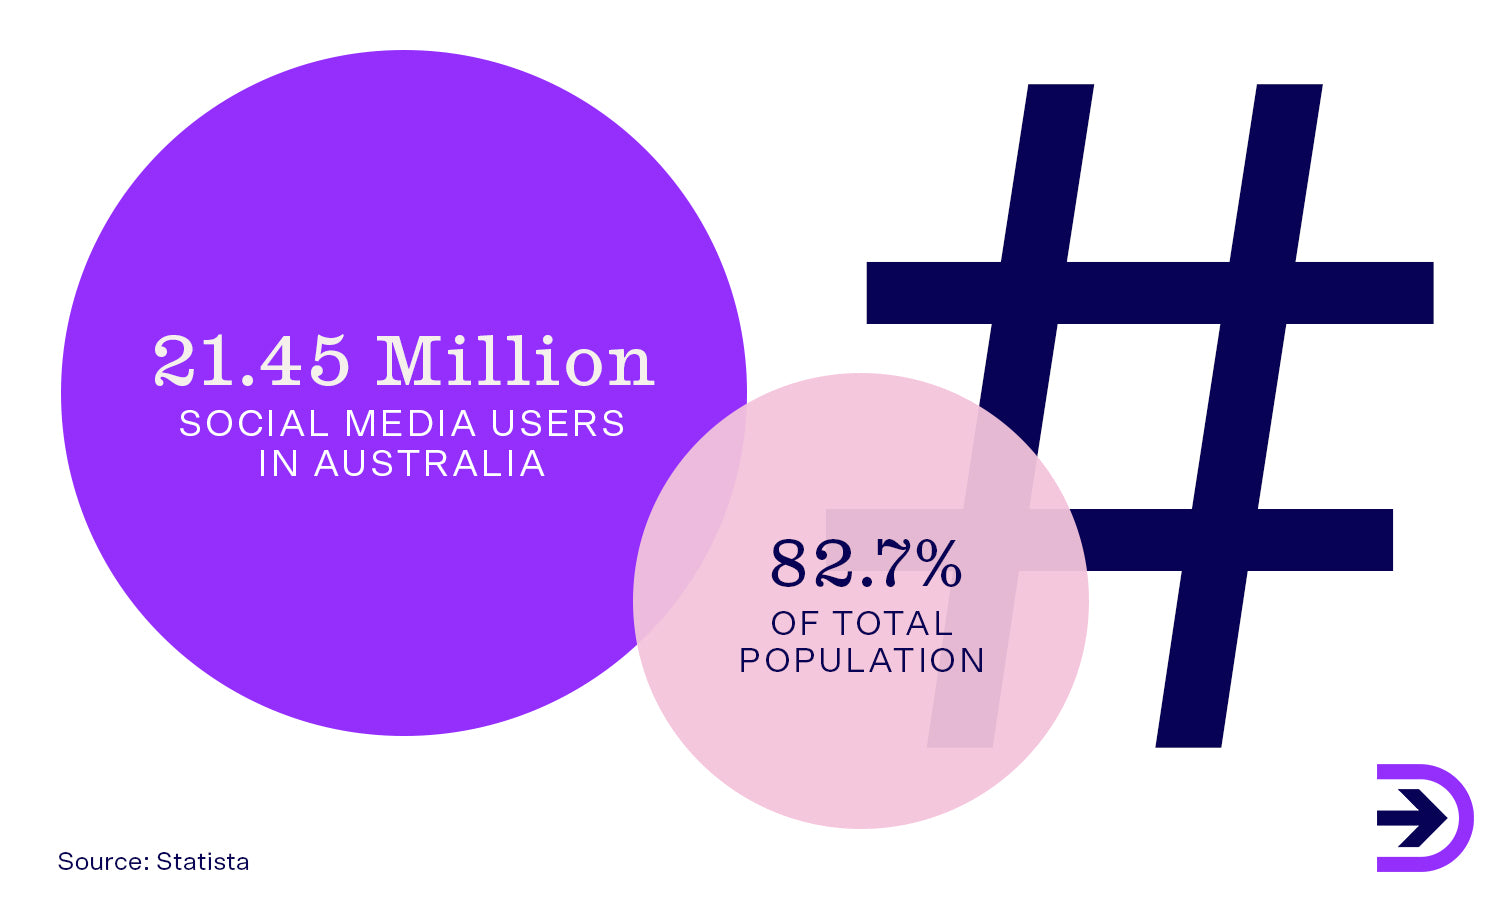 There are 21.45 million social media users in Australia and tracking hashtags and popular fashion bloggers can provide insight into emerging trends.